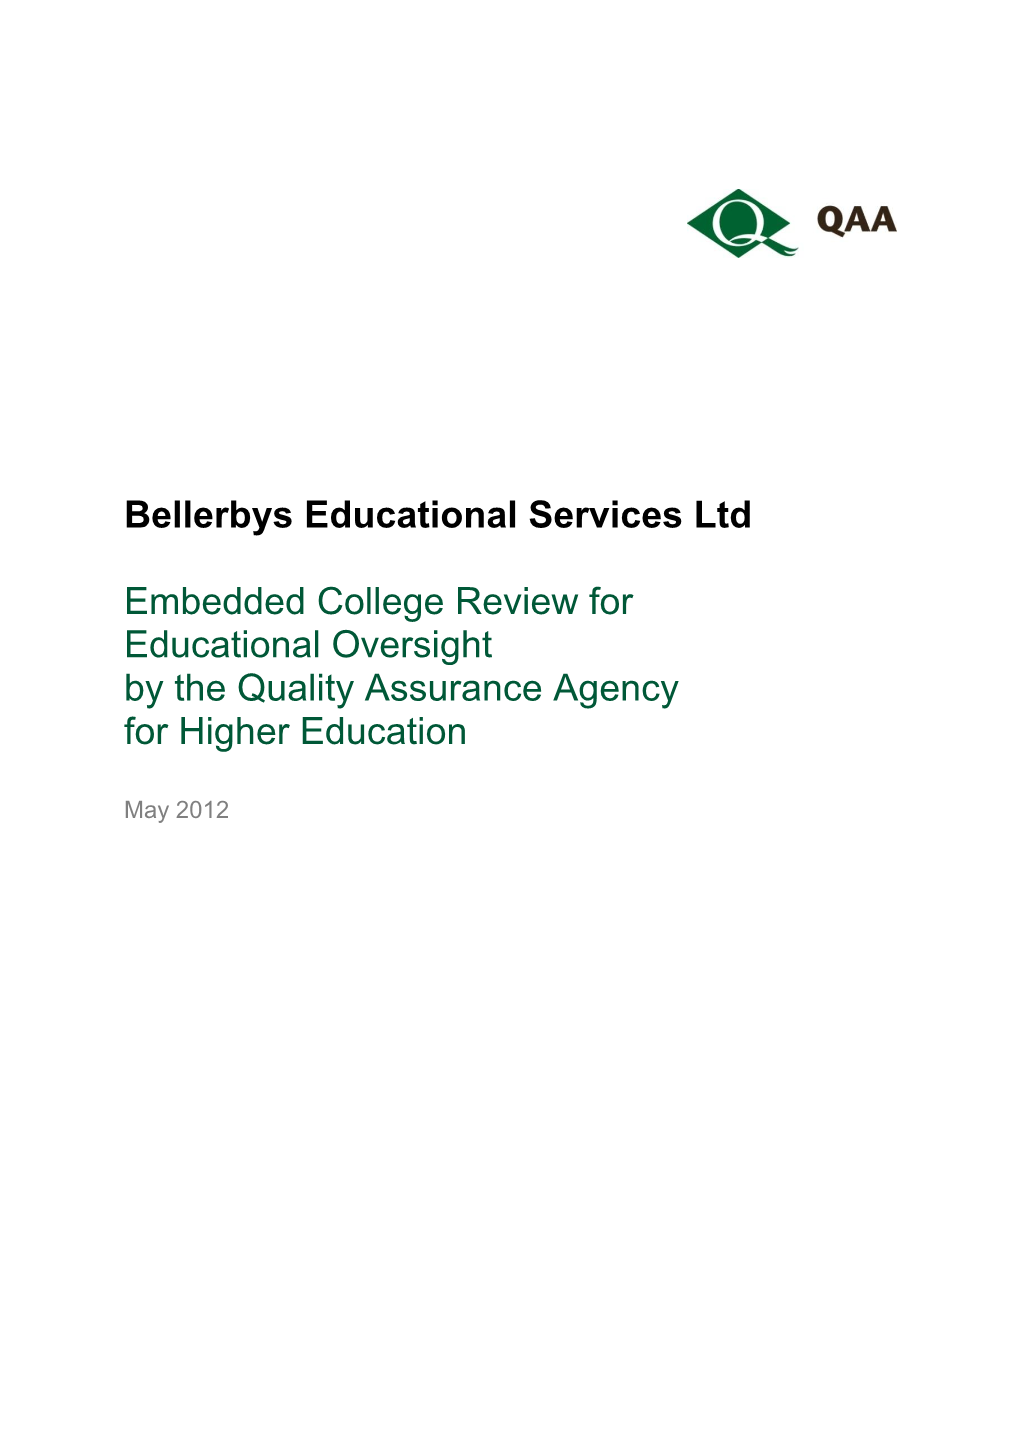 Bellerbys Educational Services Ltd Embedded College Review For